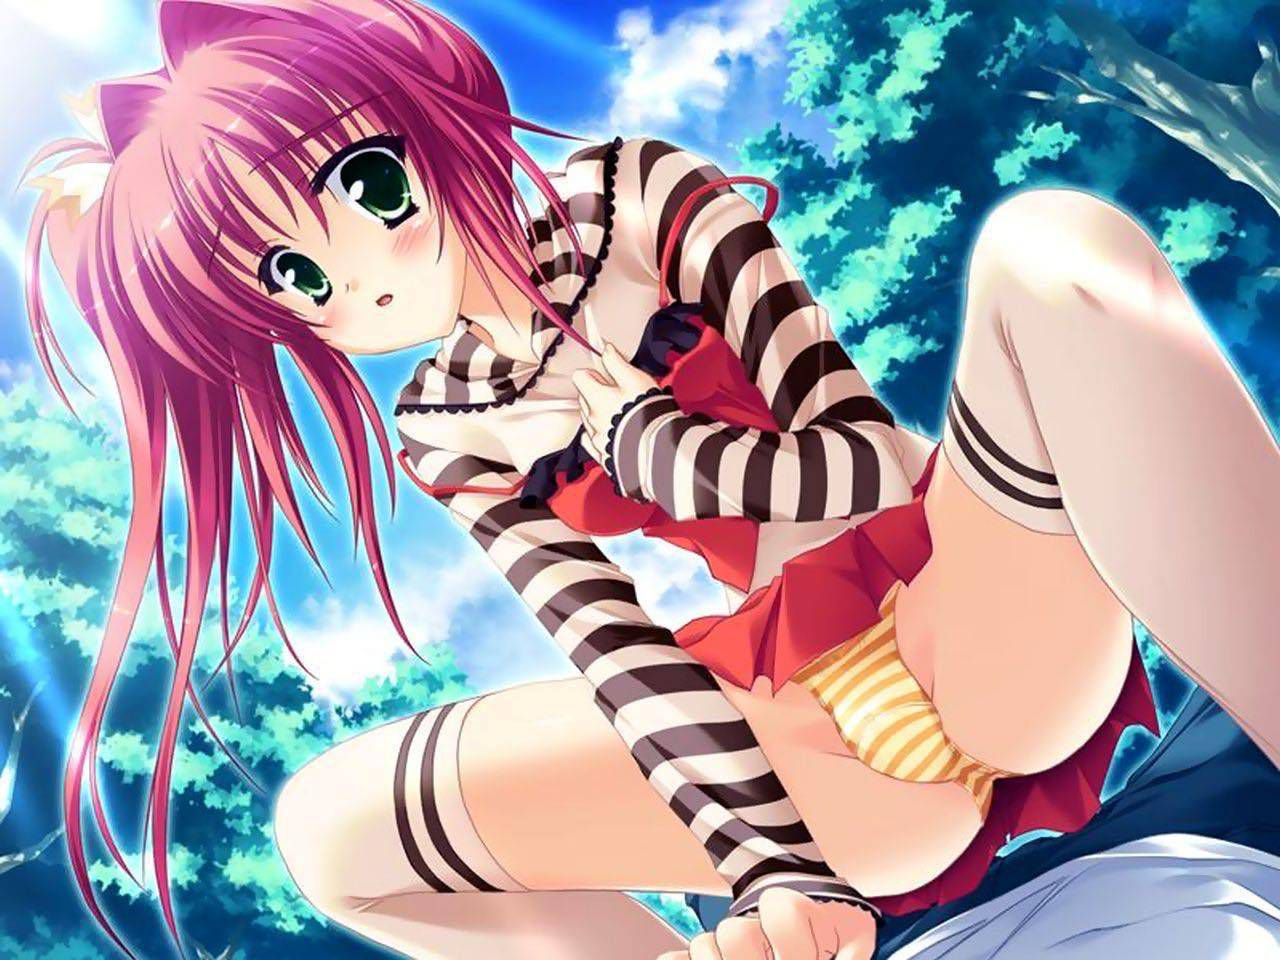 Images of the girl wearing striped pants 4